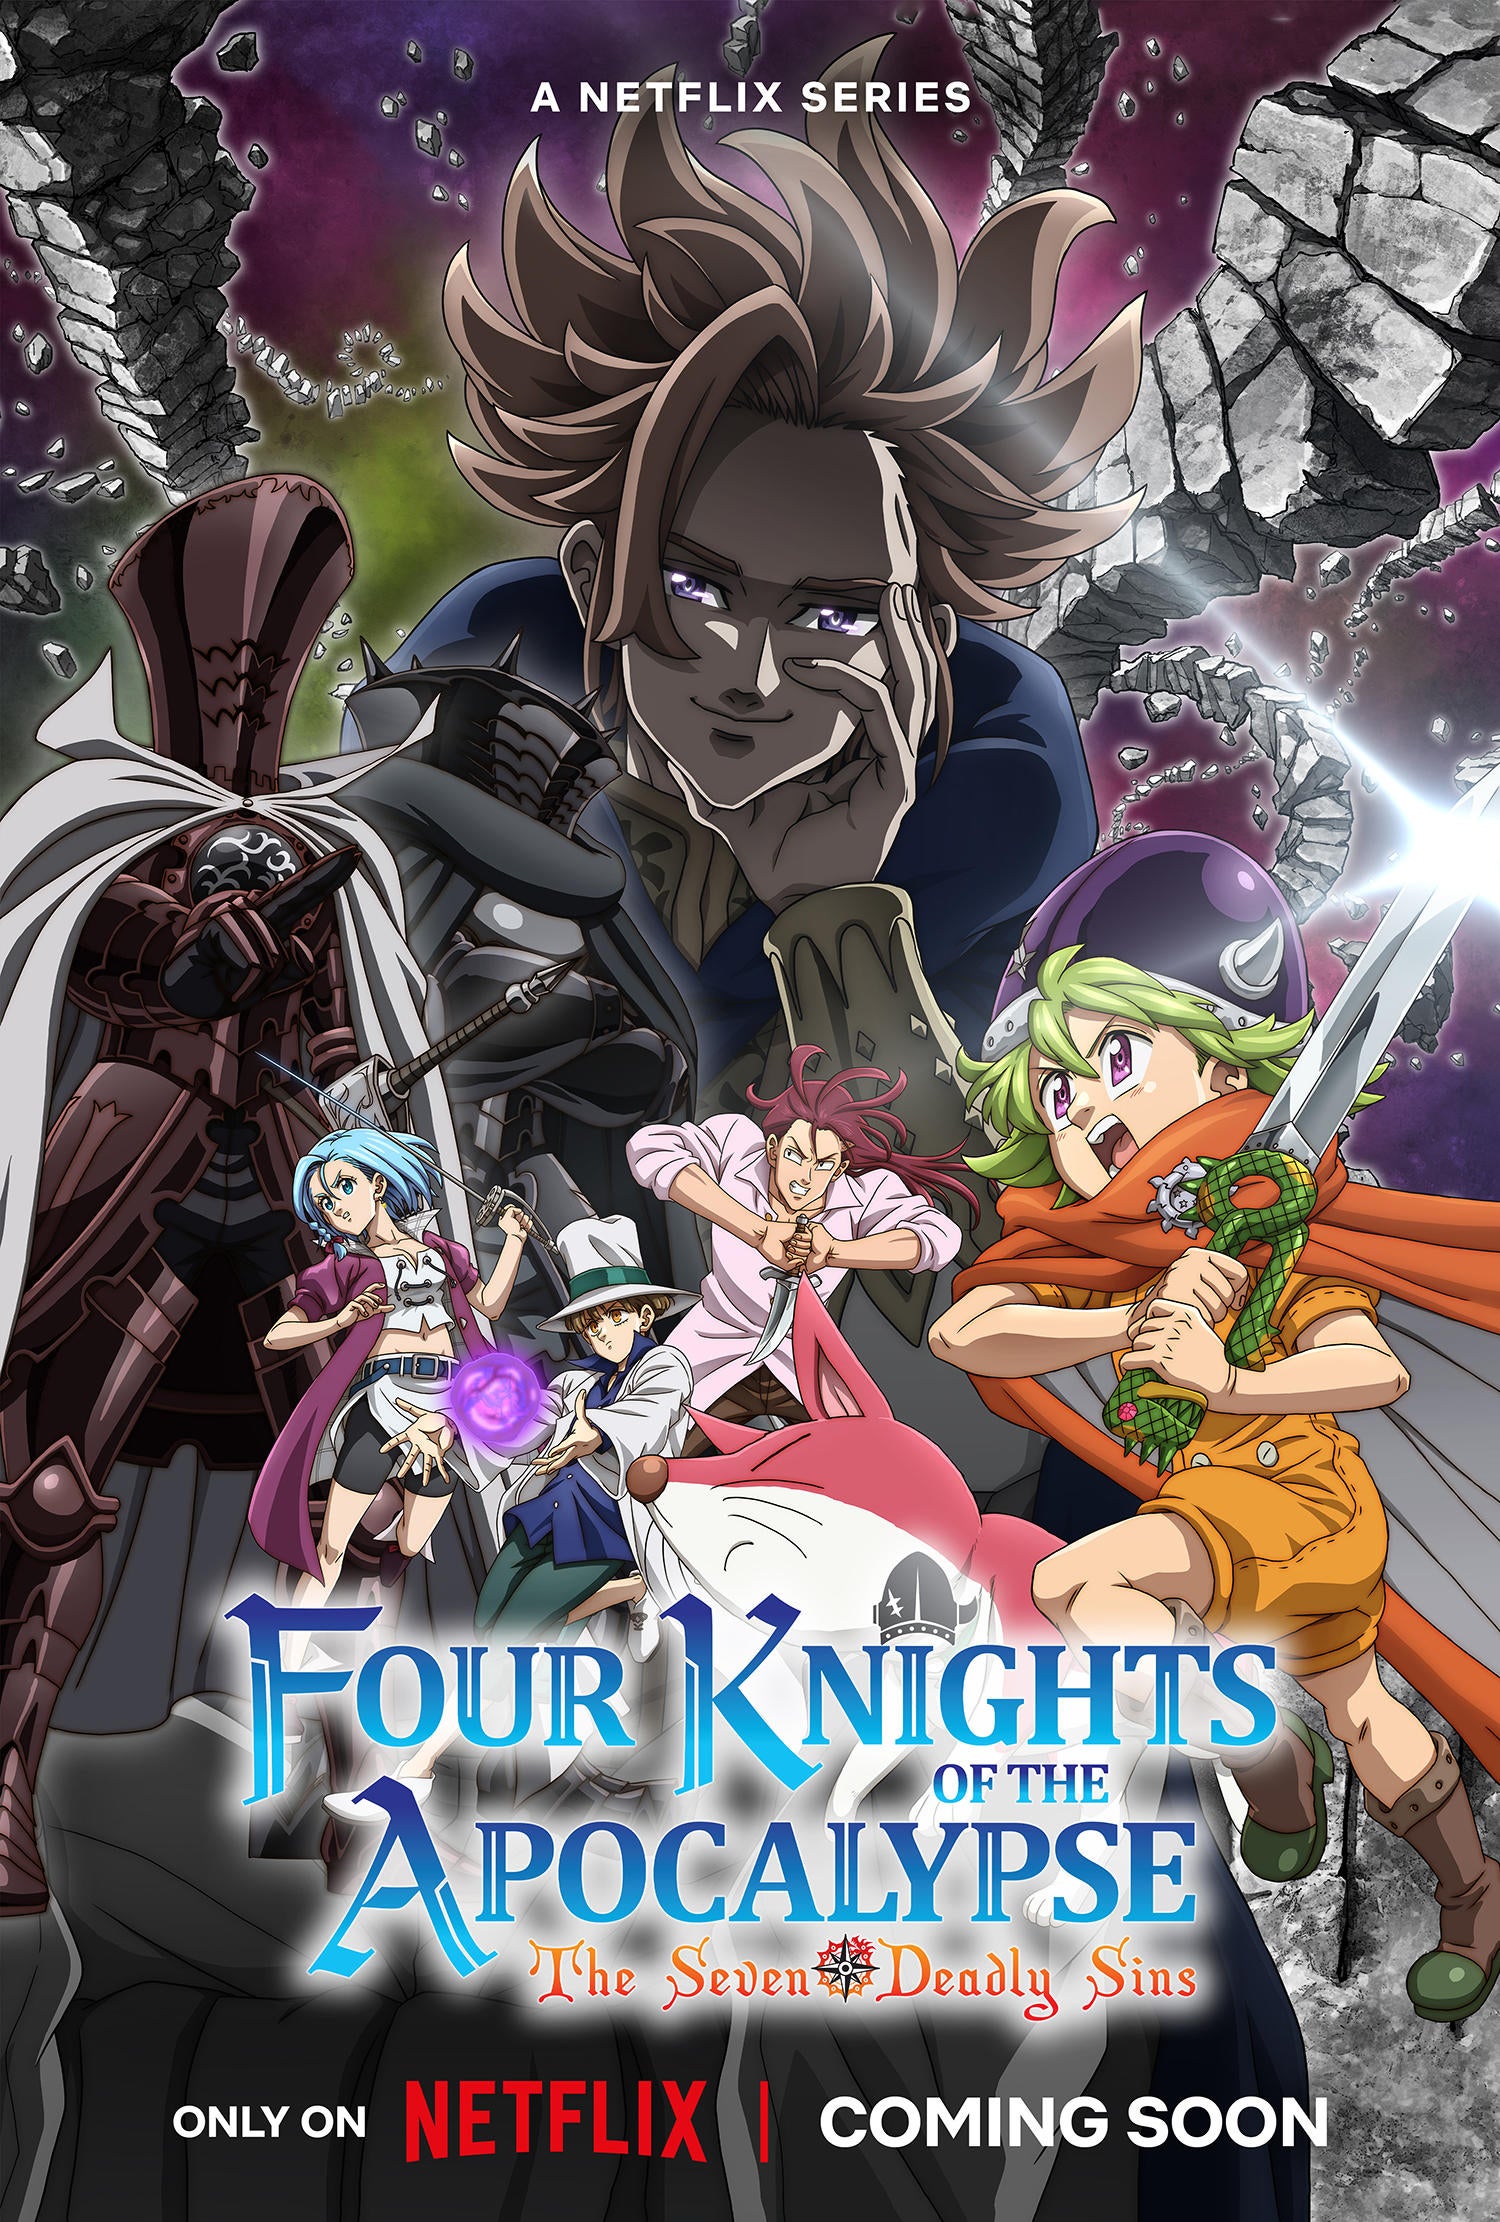 The Seven Deadly Sins: Four Knights of the Apocalypse teaser